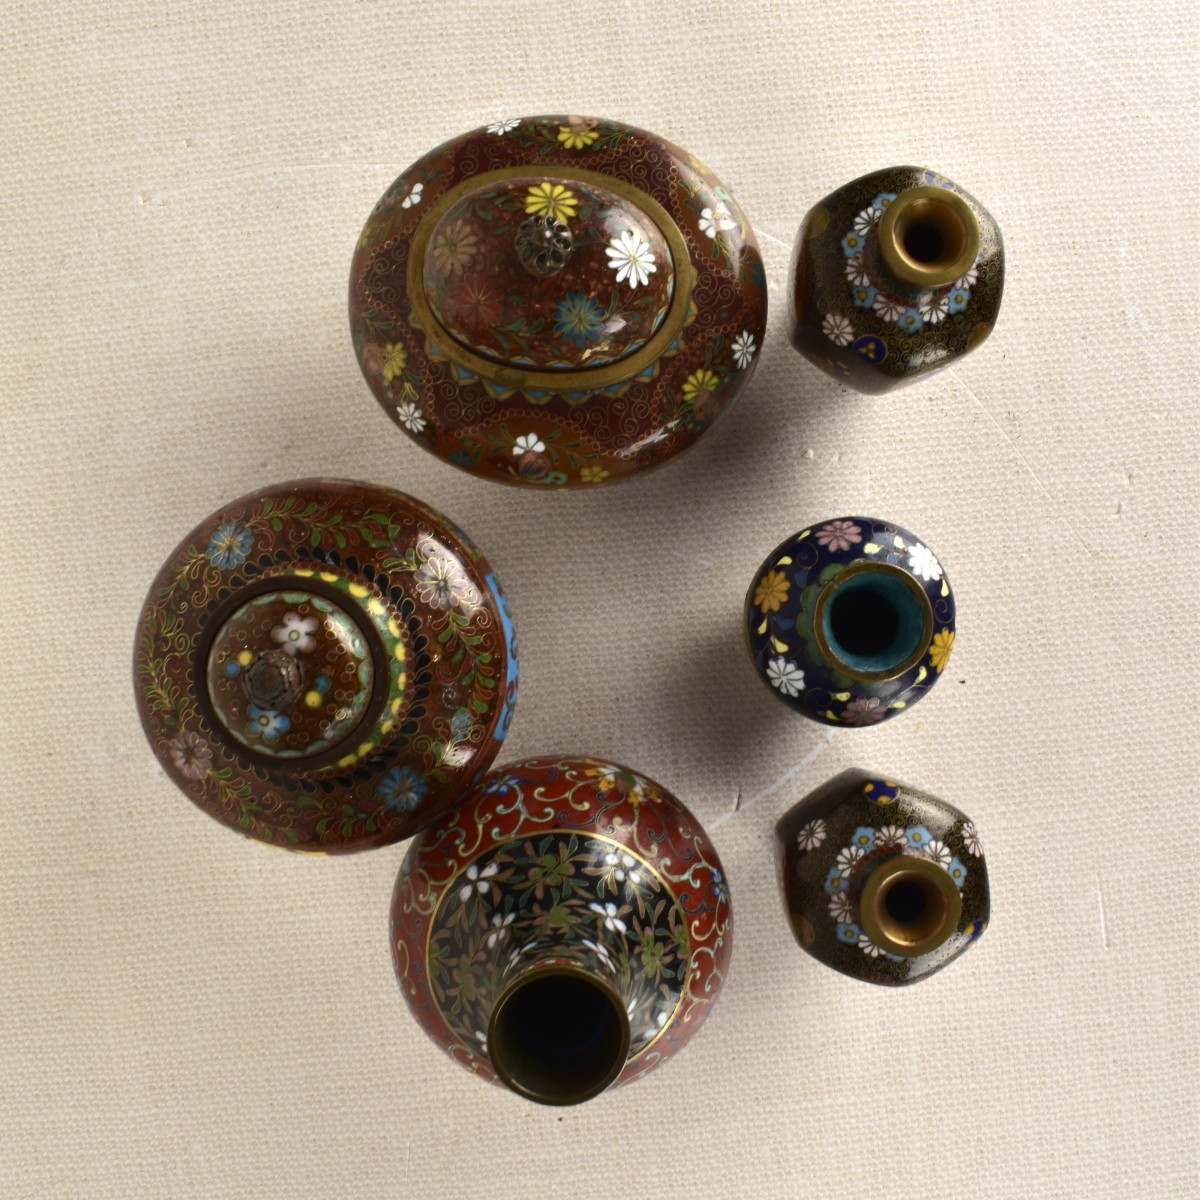 Group of Six (6) Japanese Cloisonne Items